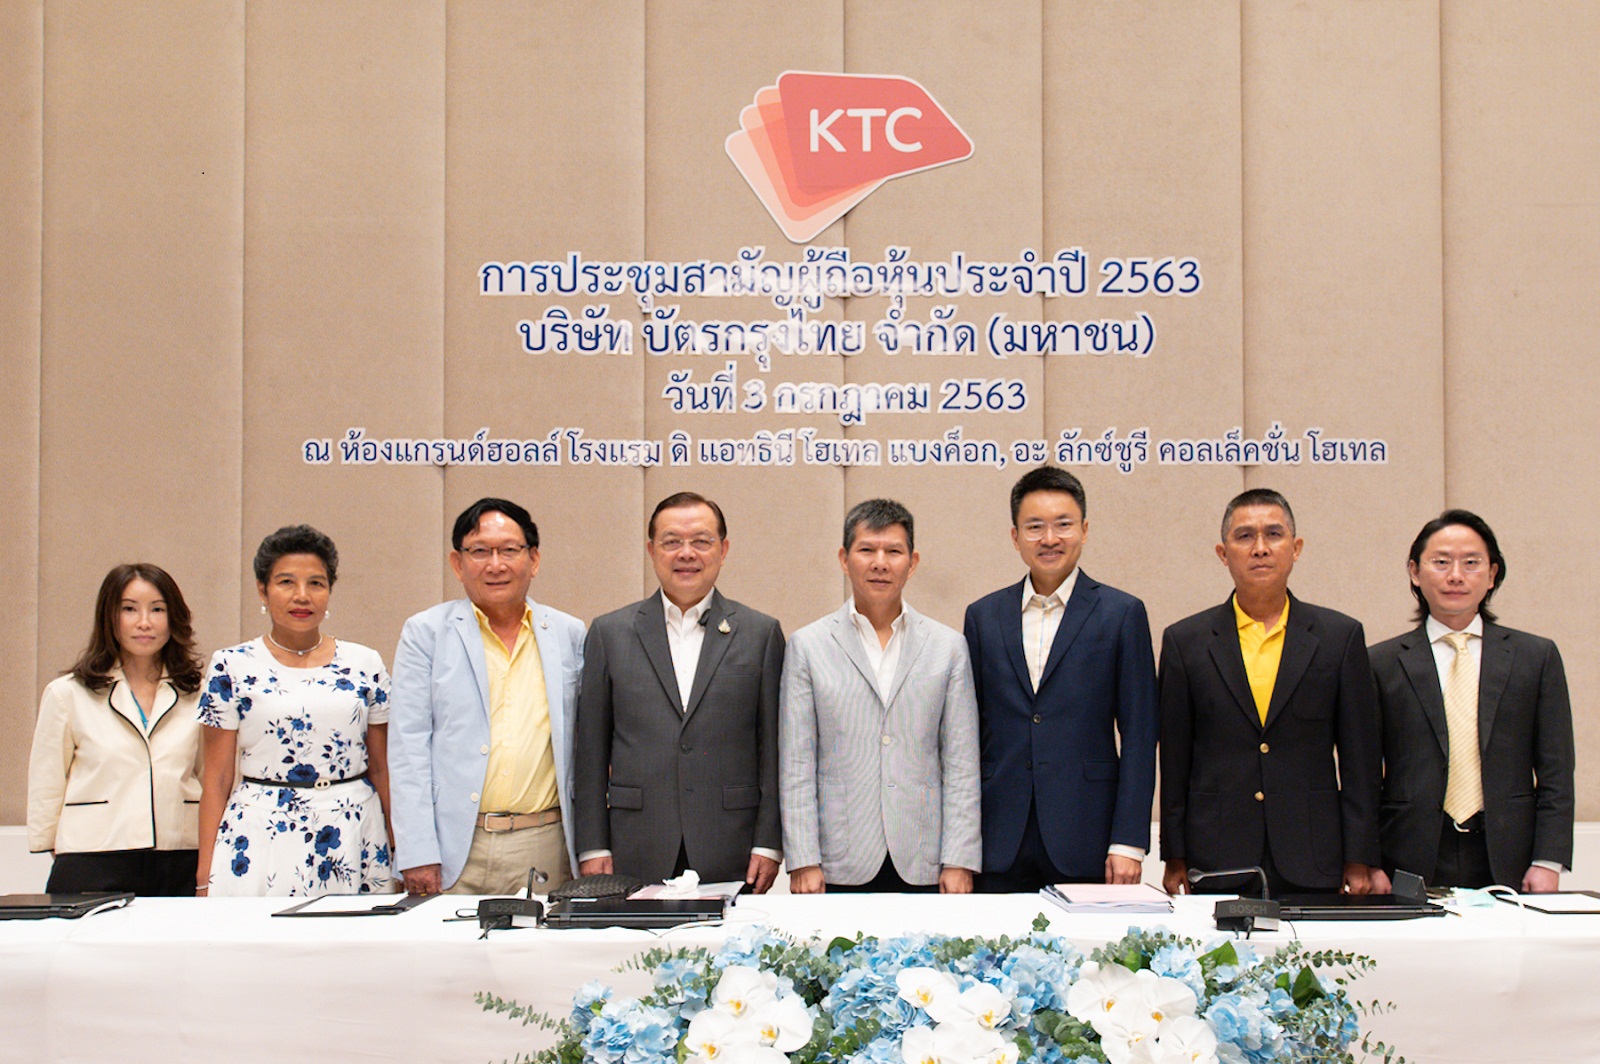 KTC held its annual general shareholders meeting for 2020 in anticipation of the new normal lifestyle.